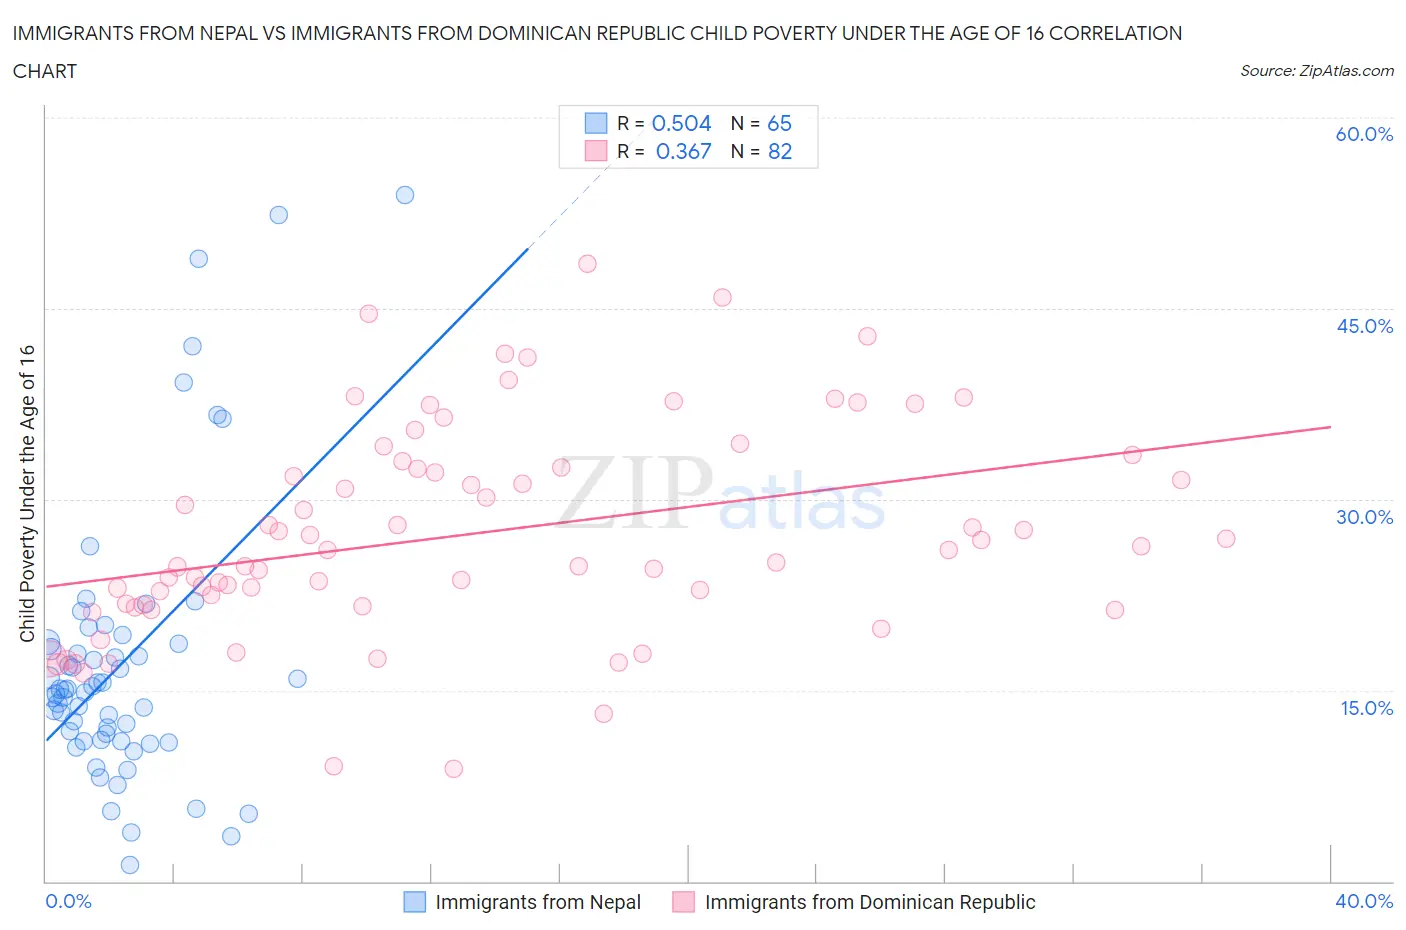 Immigrants from Nepal vs Immigrants from Dominican Republic Child Poverty Under the Age of 16